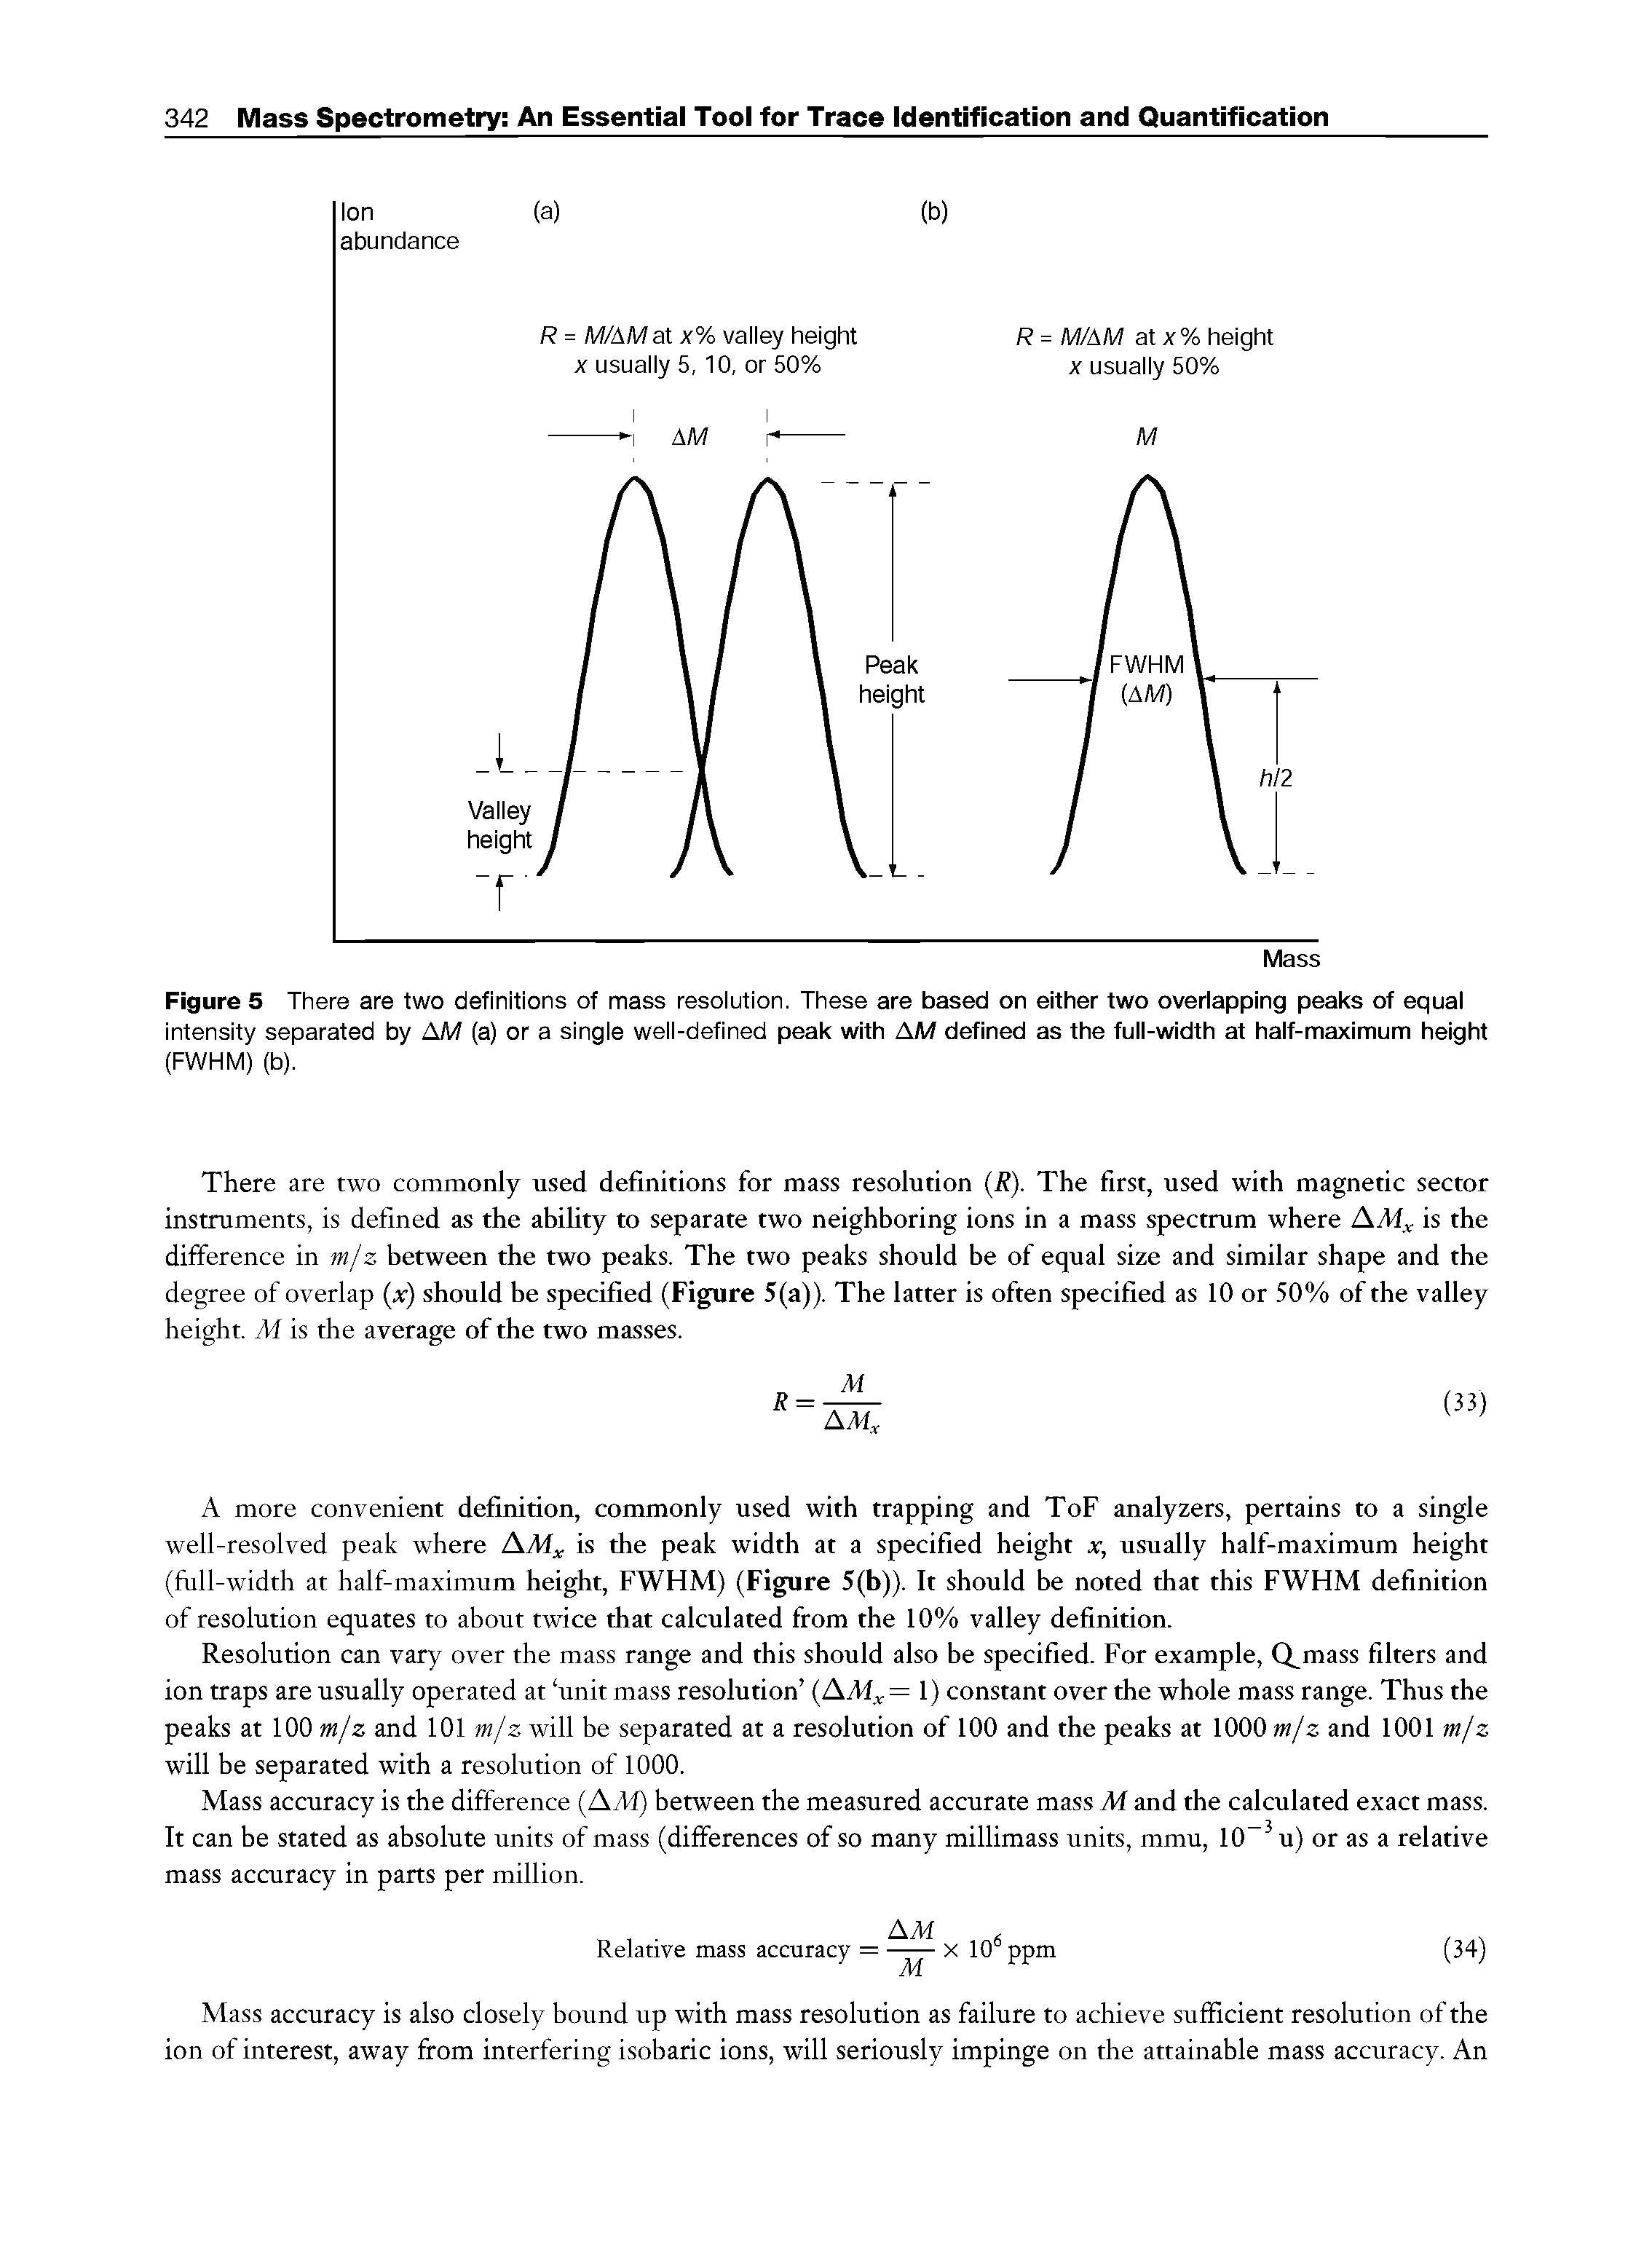 Figure 5 There are two definitions of mass resolution. These are based on either two overlapping peaks of equal intensity separated by AM (a) or a single well-defined peak with AM defined as the full-width at half-maximum height (FWHM) (b).